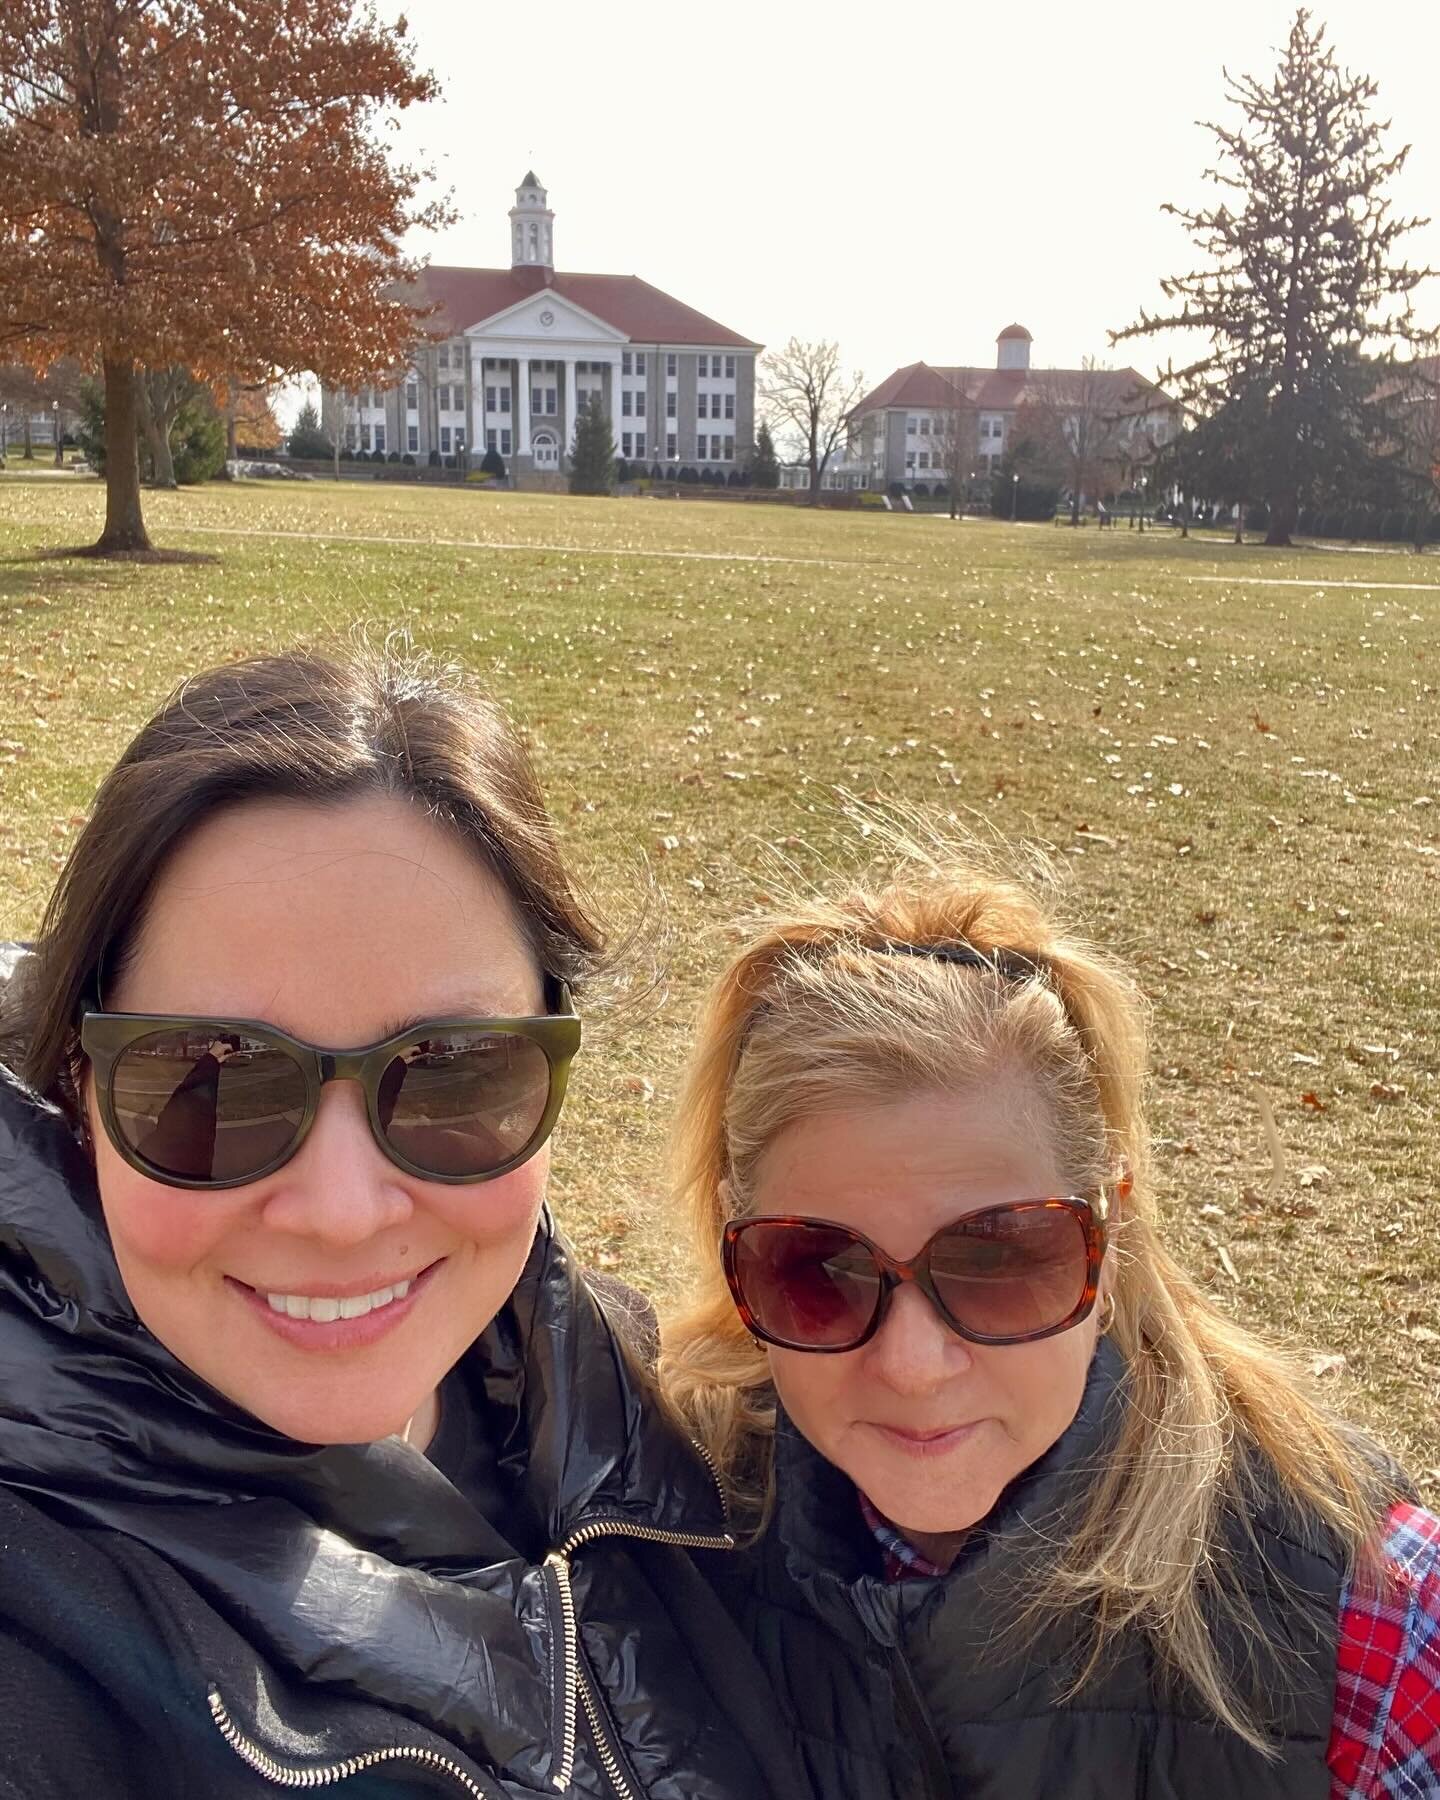 Even though students are on Winter Break, it&rsquo;s never a bad time to go on a college trip! We did a walk through @jamesmadisonuniversity yesterday morning and it was a beautiful visit. While the campus was quiet, you could easily imagine it bustl